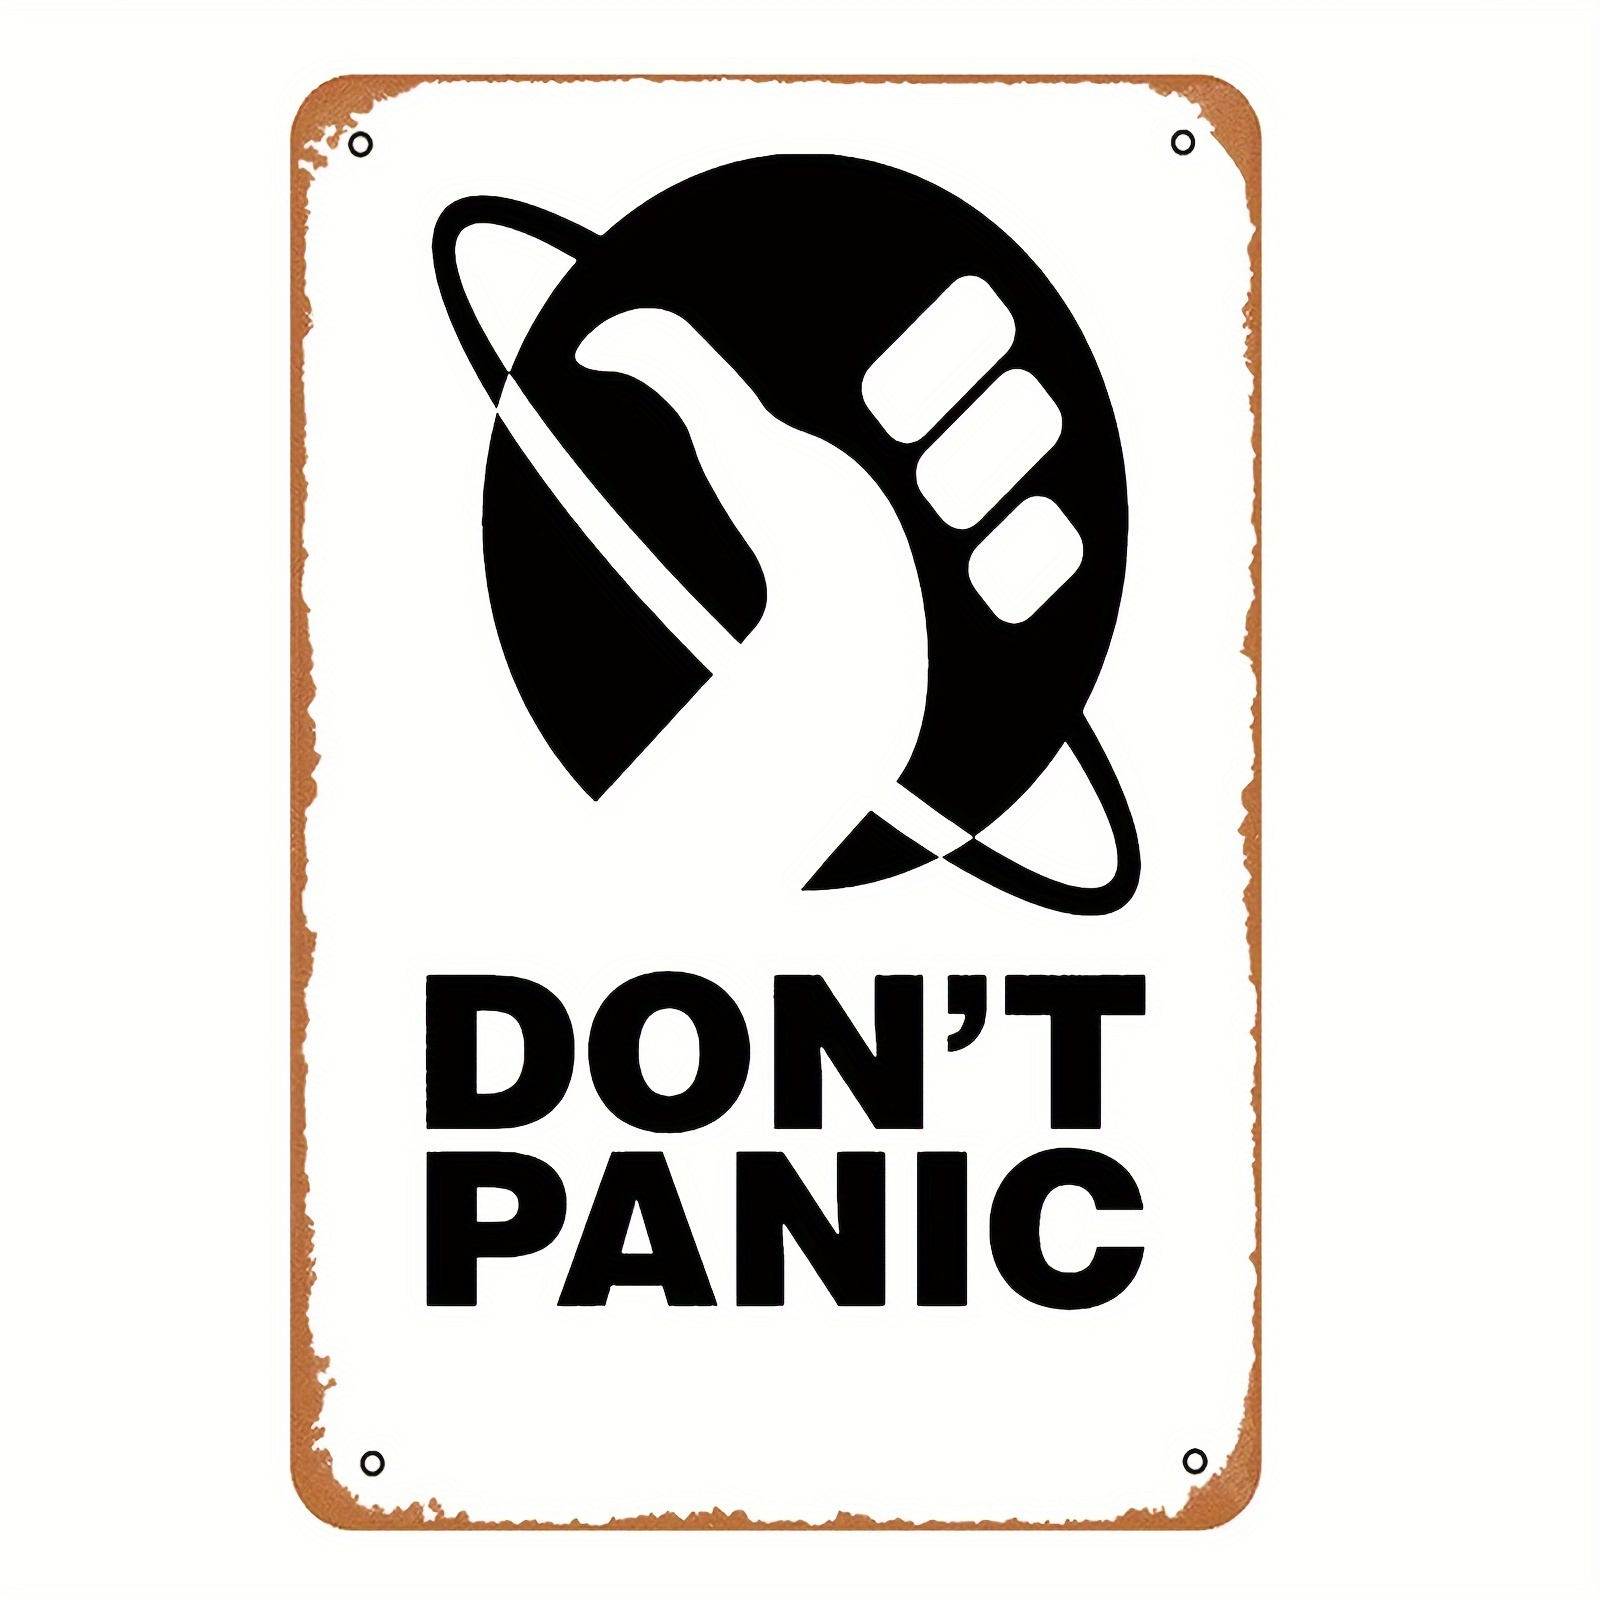 Don't Panic - Hitchhikers Guide Metal Print Metal Tin Sign Vintage 8x12 Inch